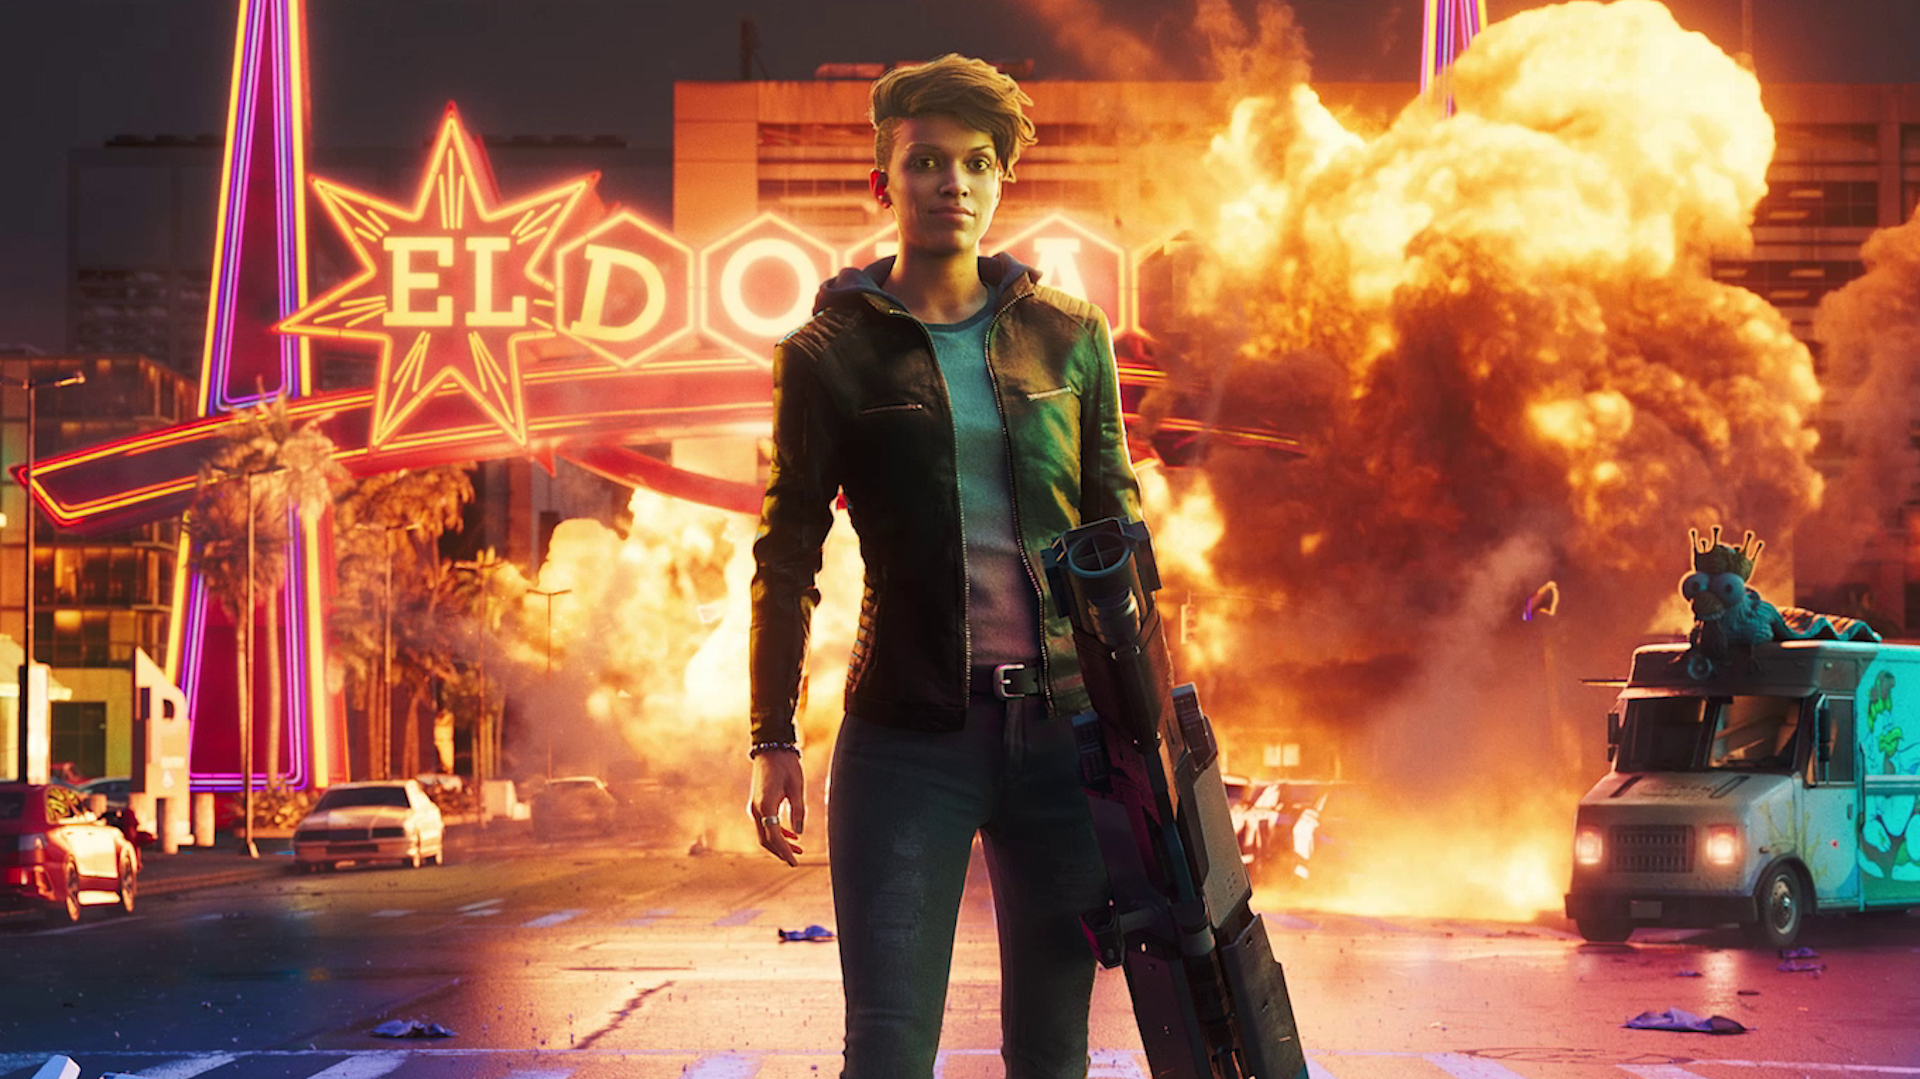 Saints Row gets a gritty reboot set in the 'weird west